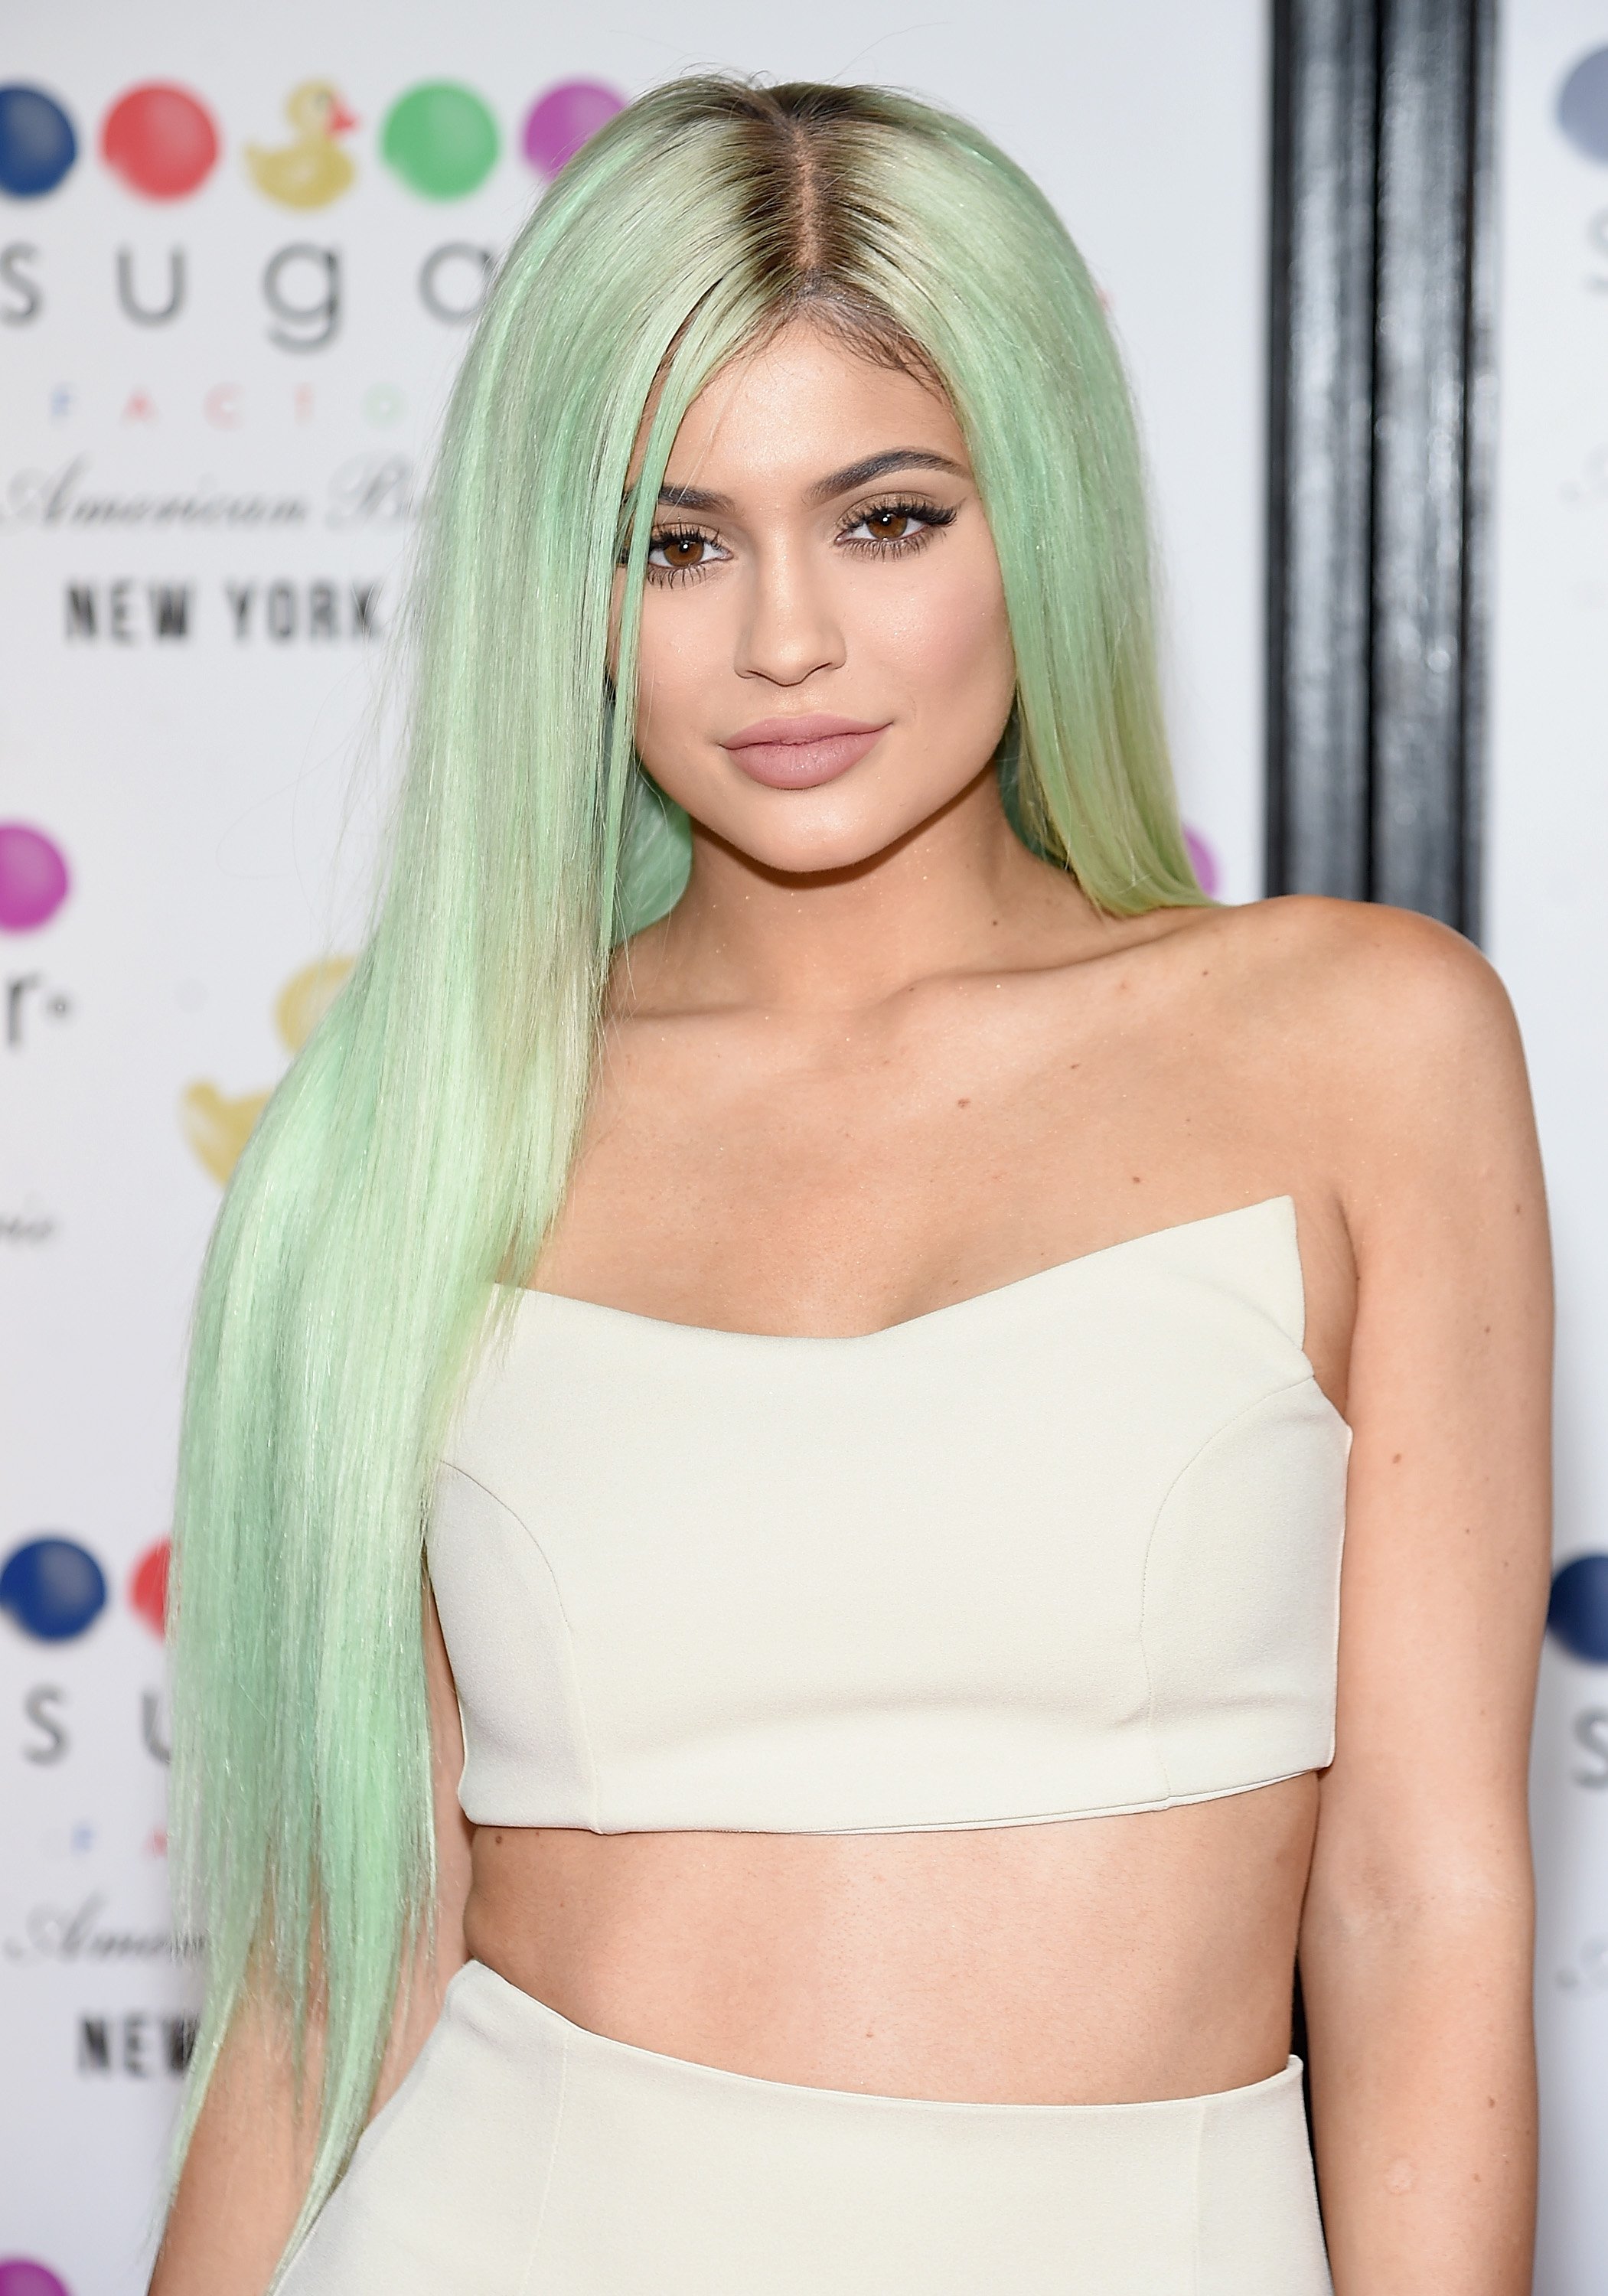 Kylie Jenner at the Grand Opening of the Sugar Factory American Brasserie on September 16, 2015. | Source: Getty Images)